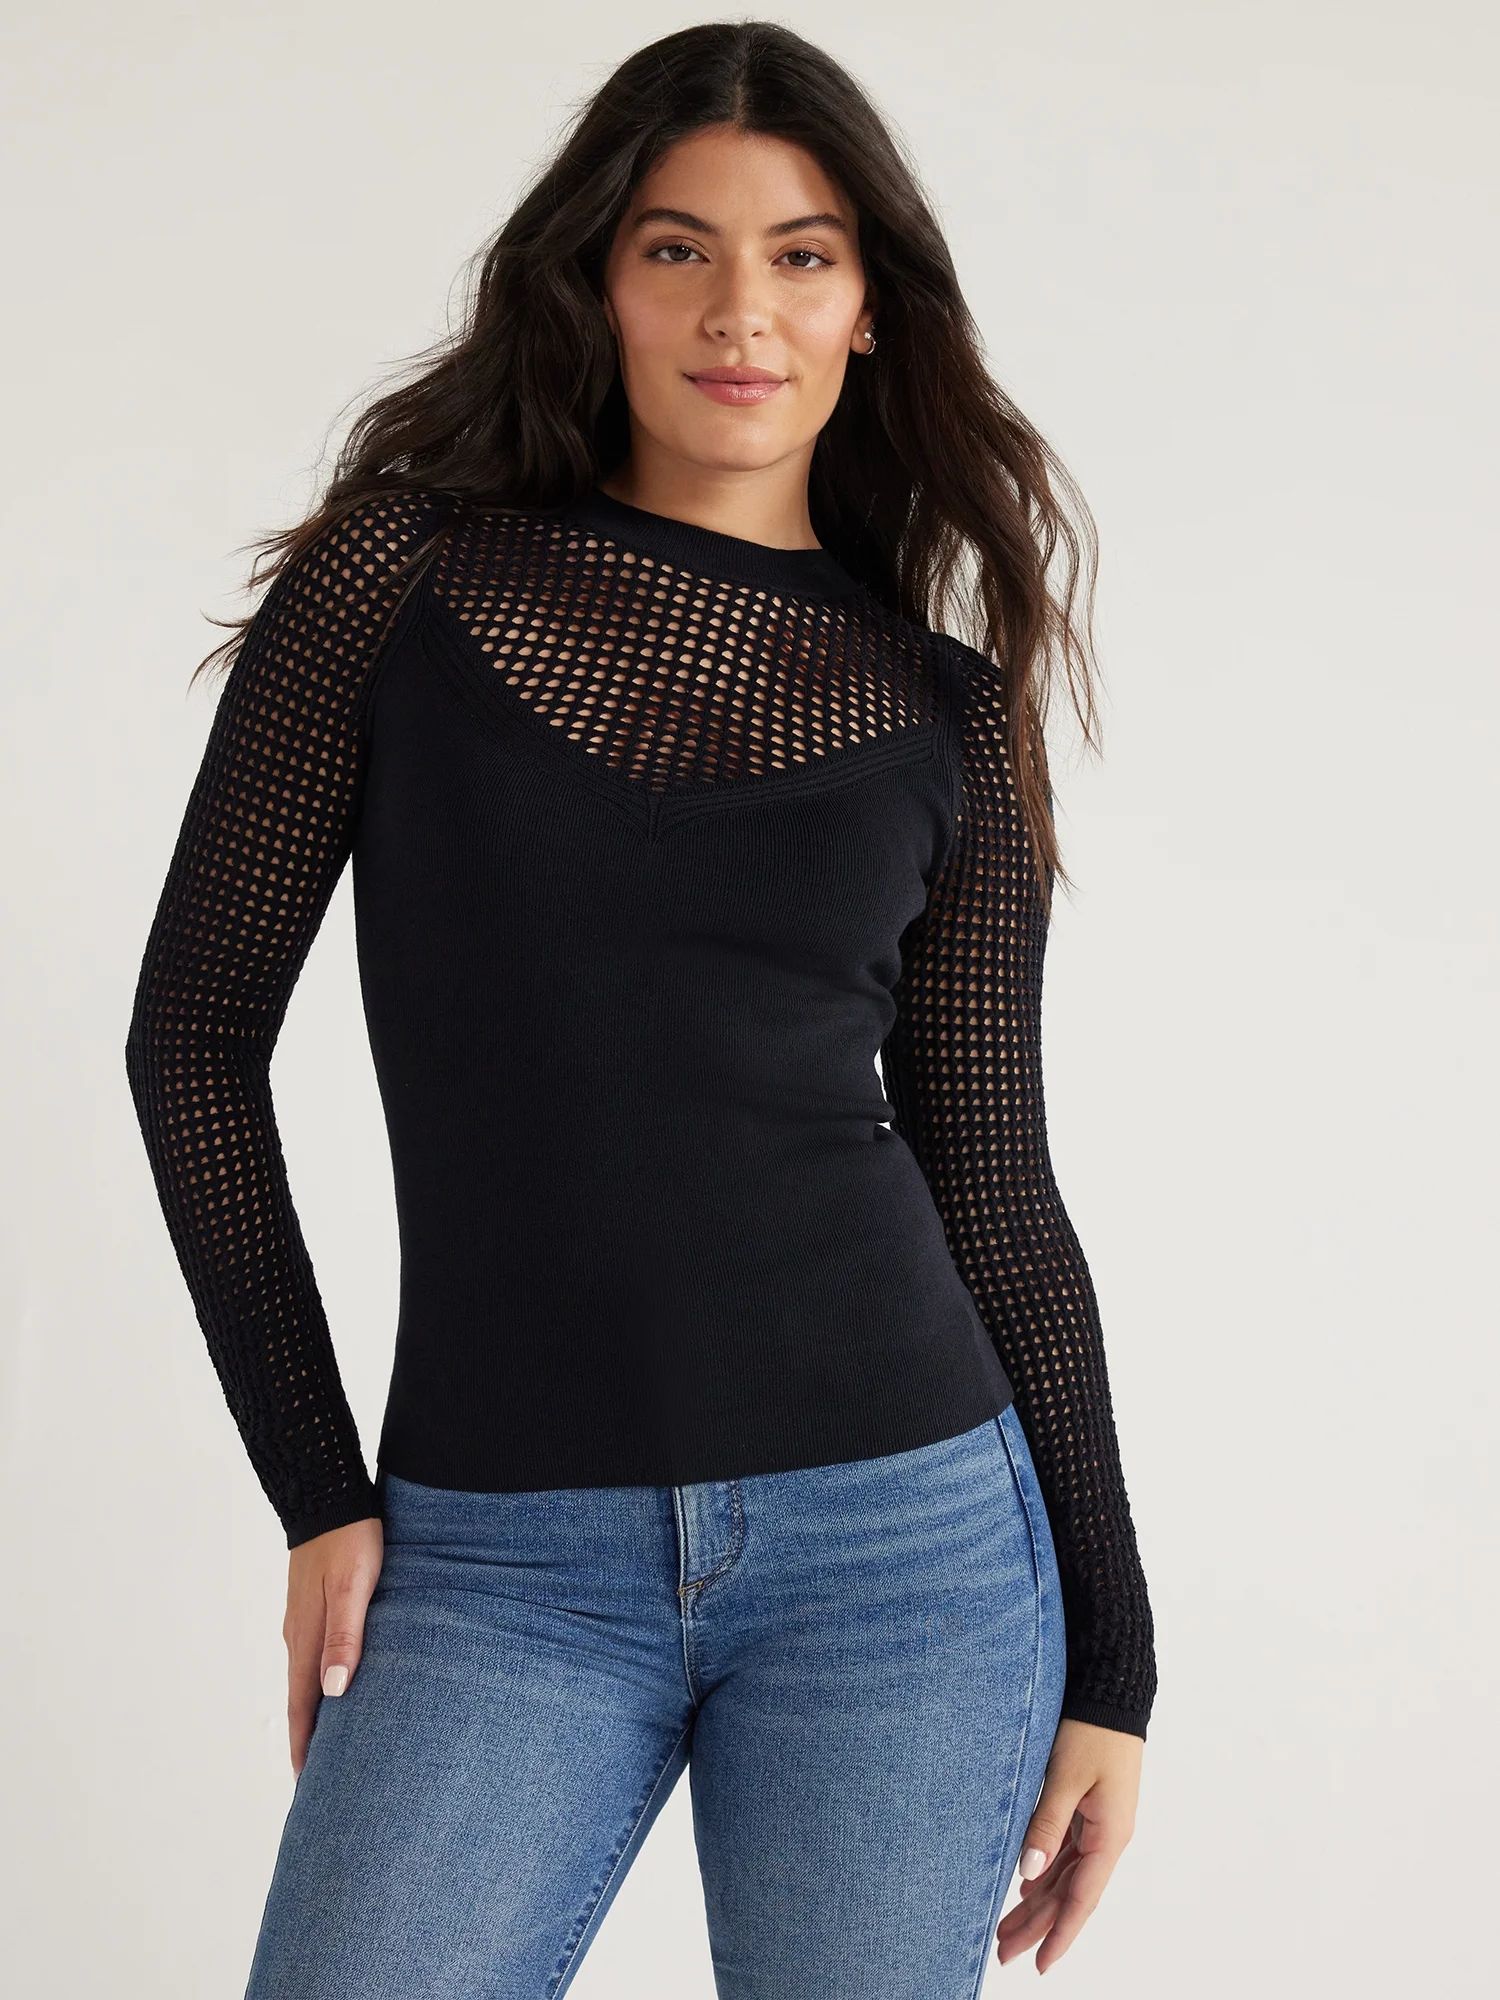 Sofia Jeans Women's V-Neck Mesh Pullover Sweater with Sheer Long Sleeves, Lightweight, Sizes XS-2... | Walmart (US)